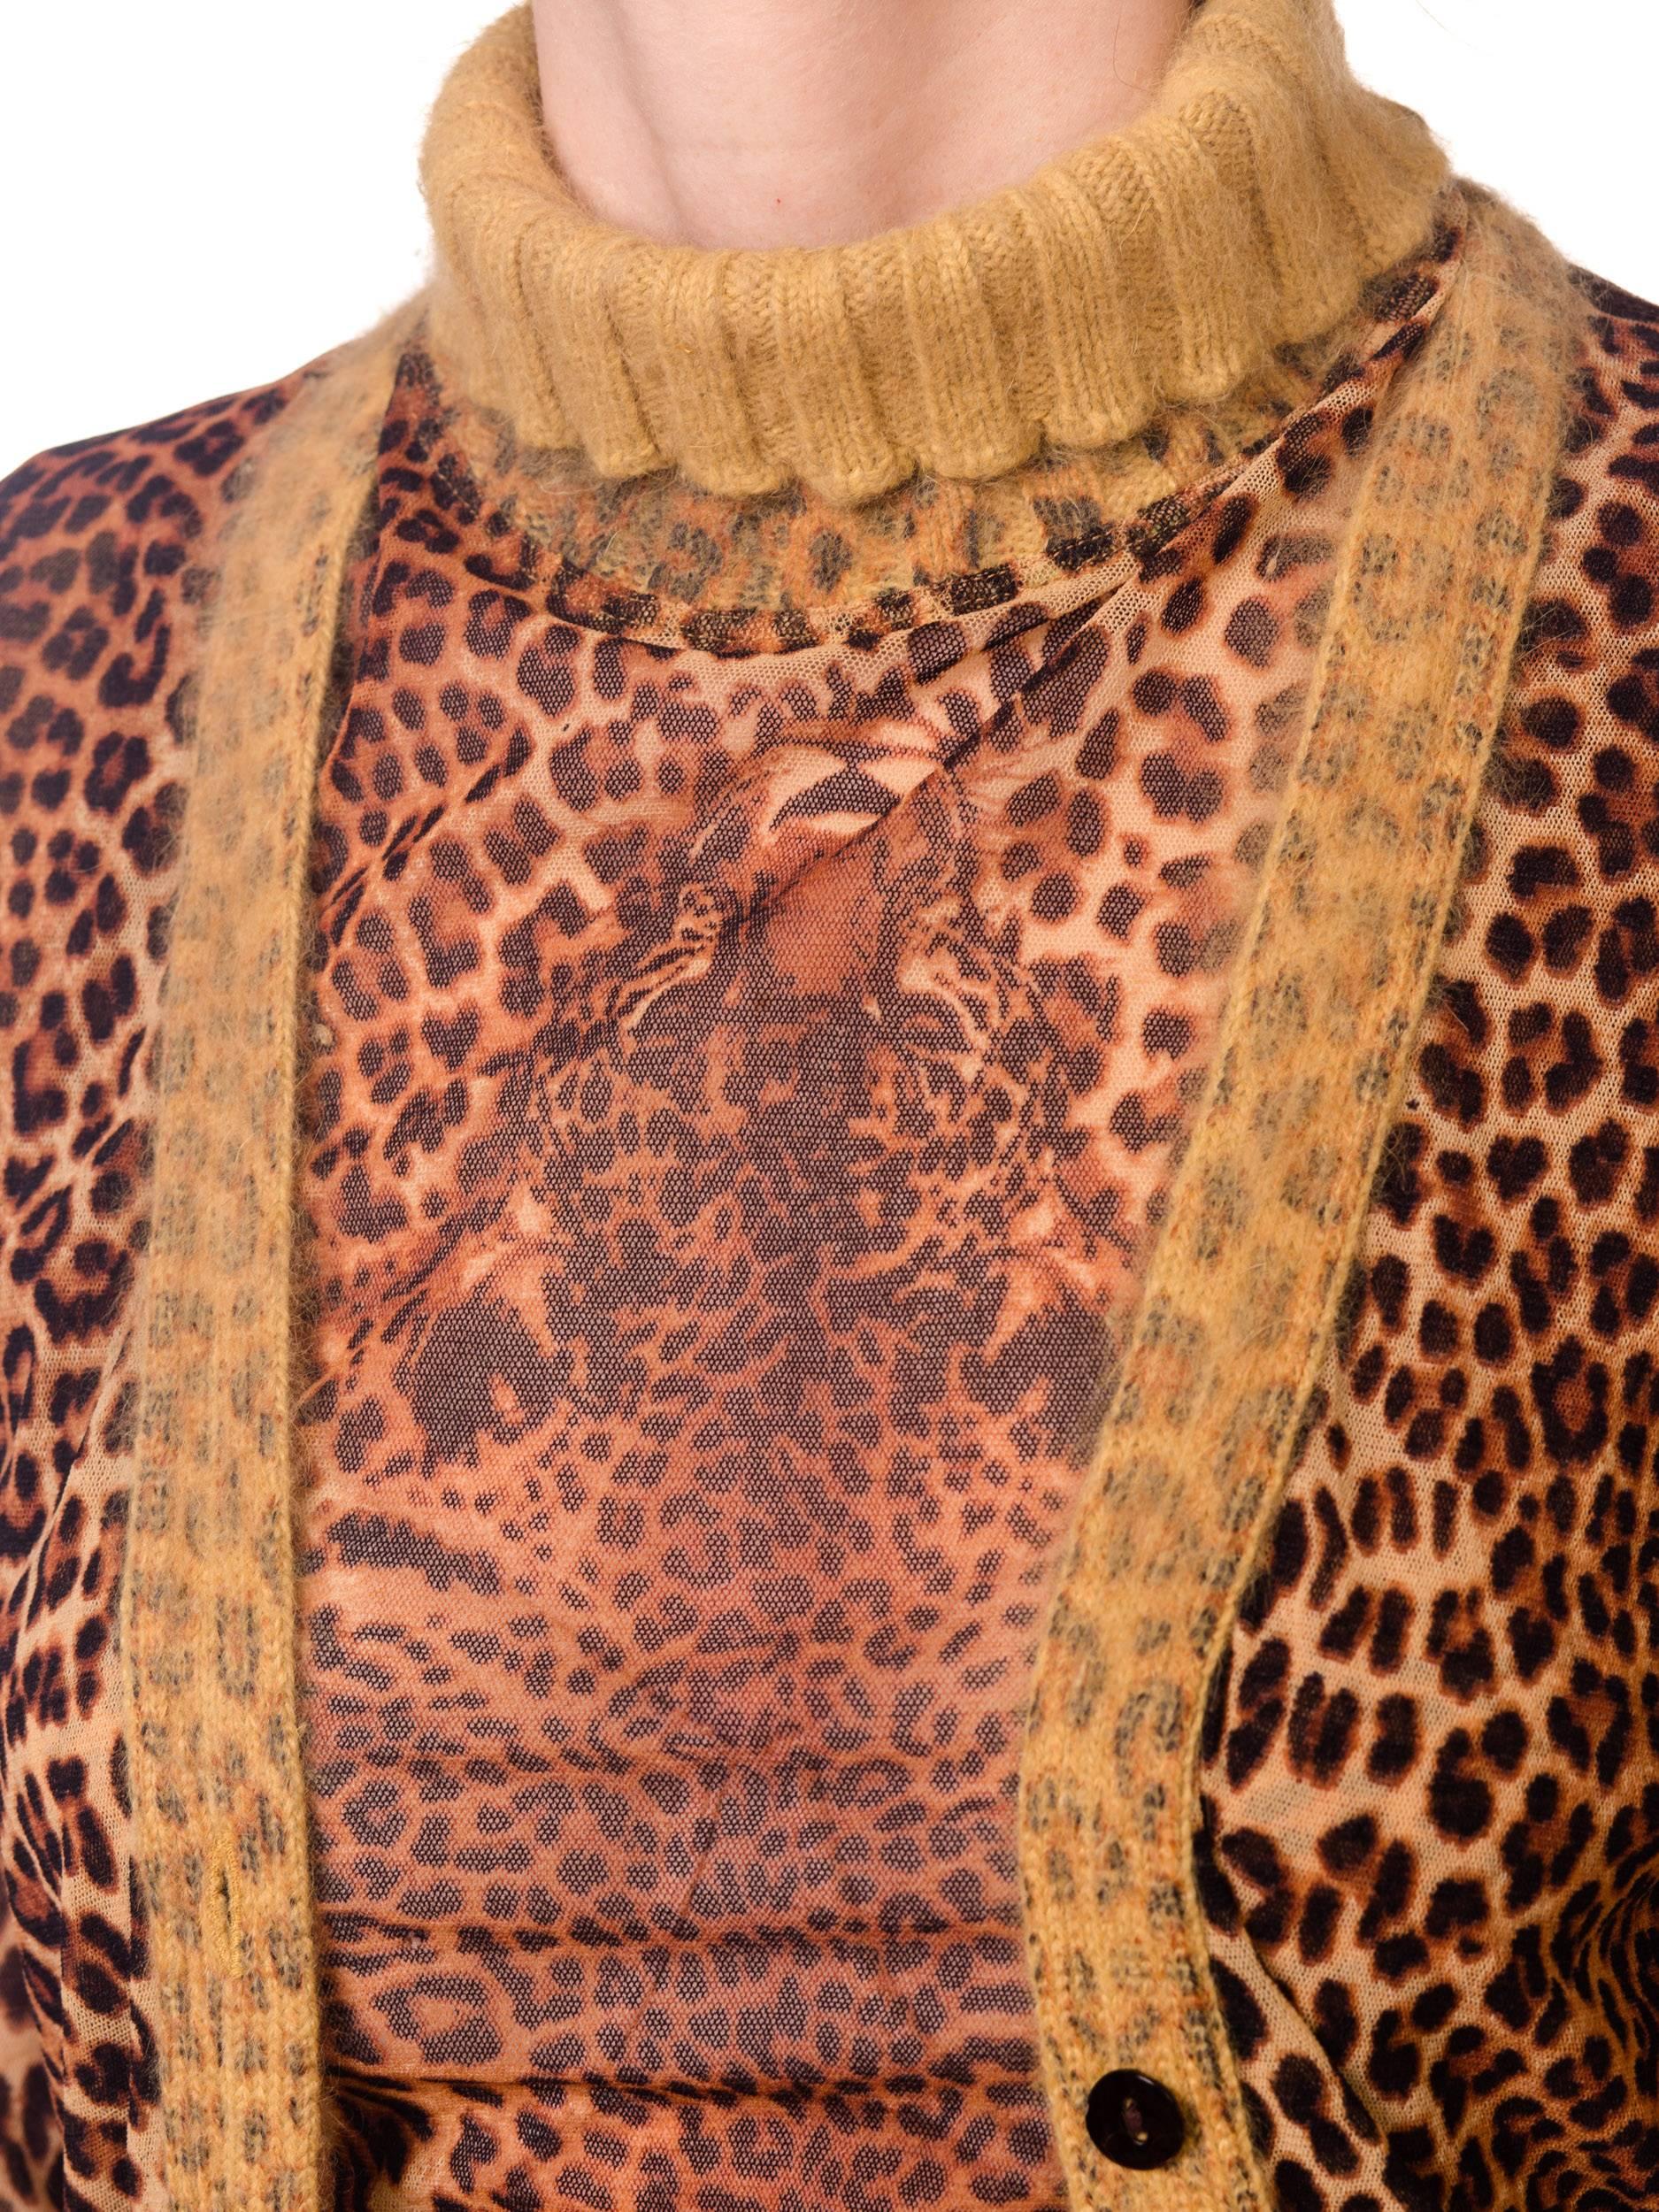 2000S JEAN PAUL GAULTIER Leopard Mesh Top And Cardigan Ensemble With Angora Trim 3